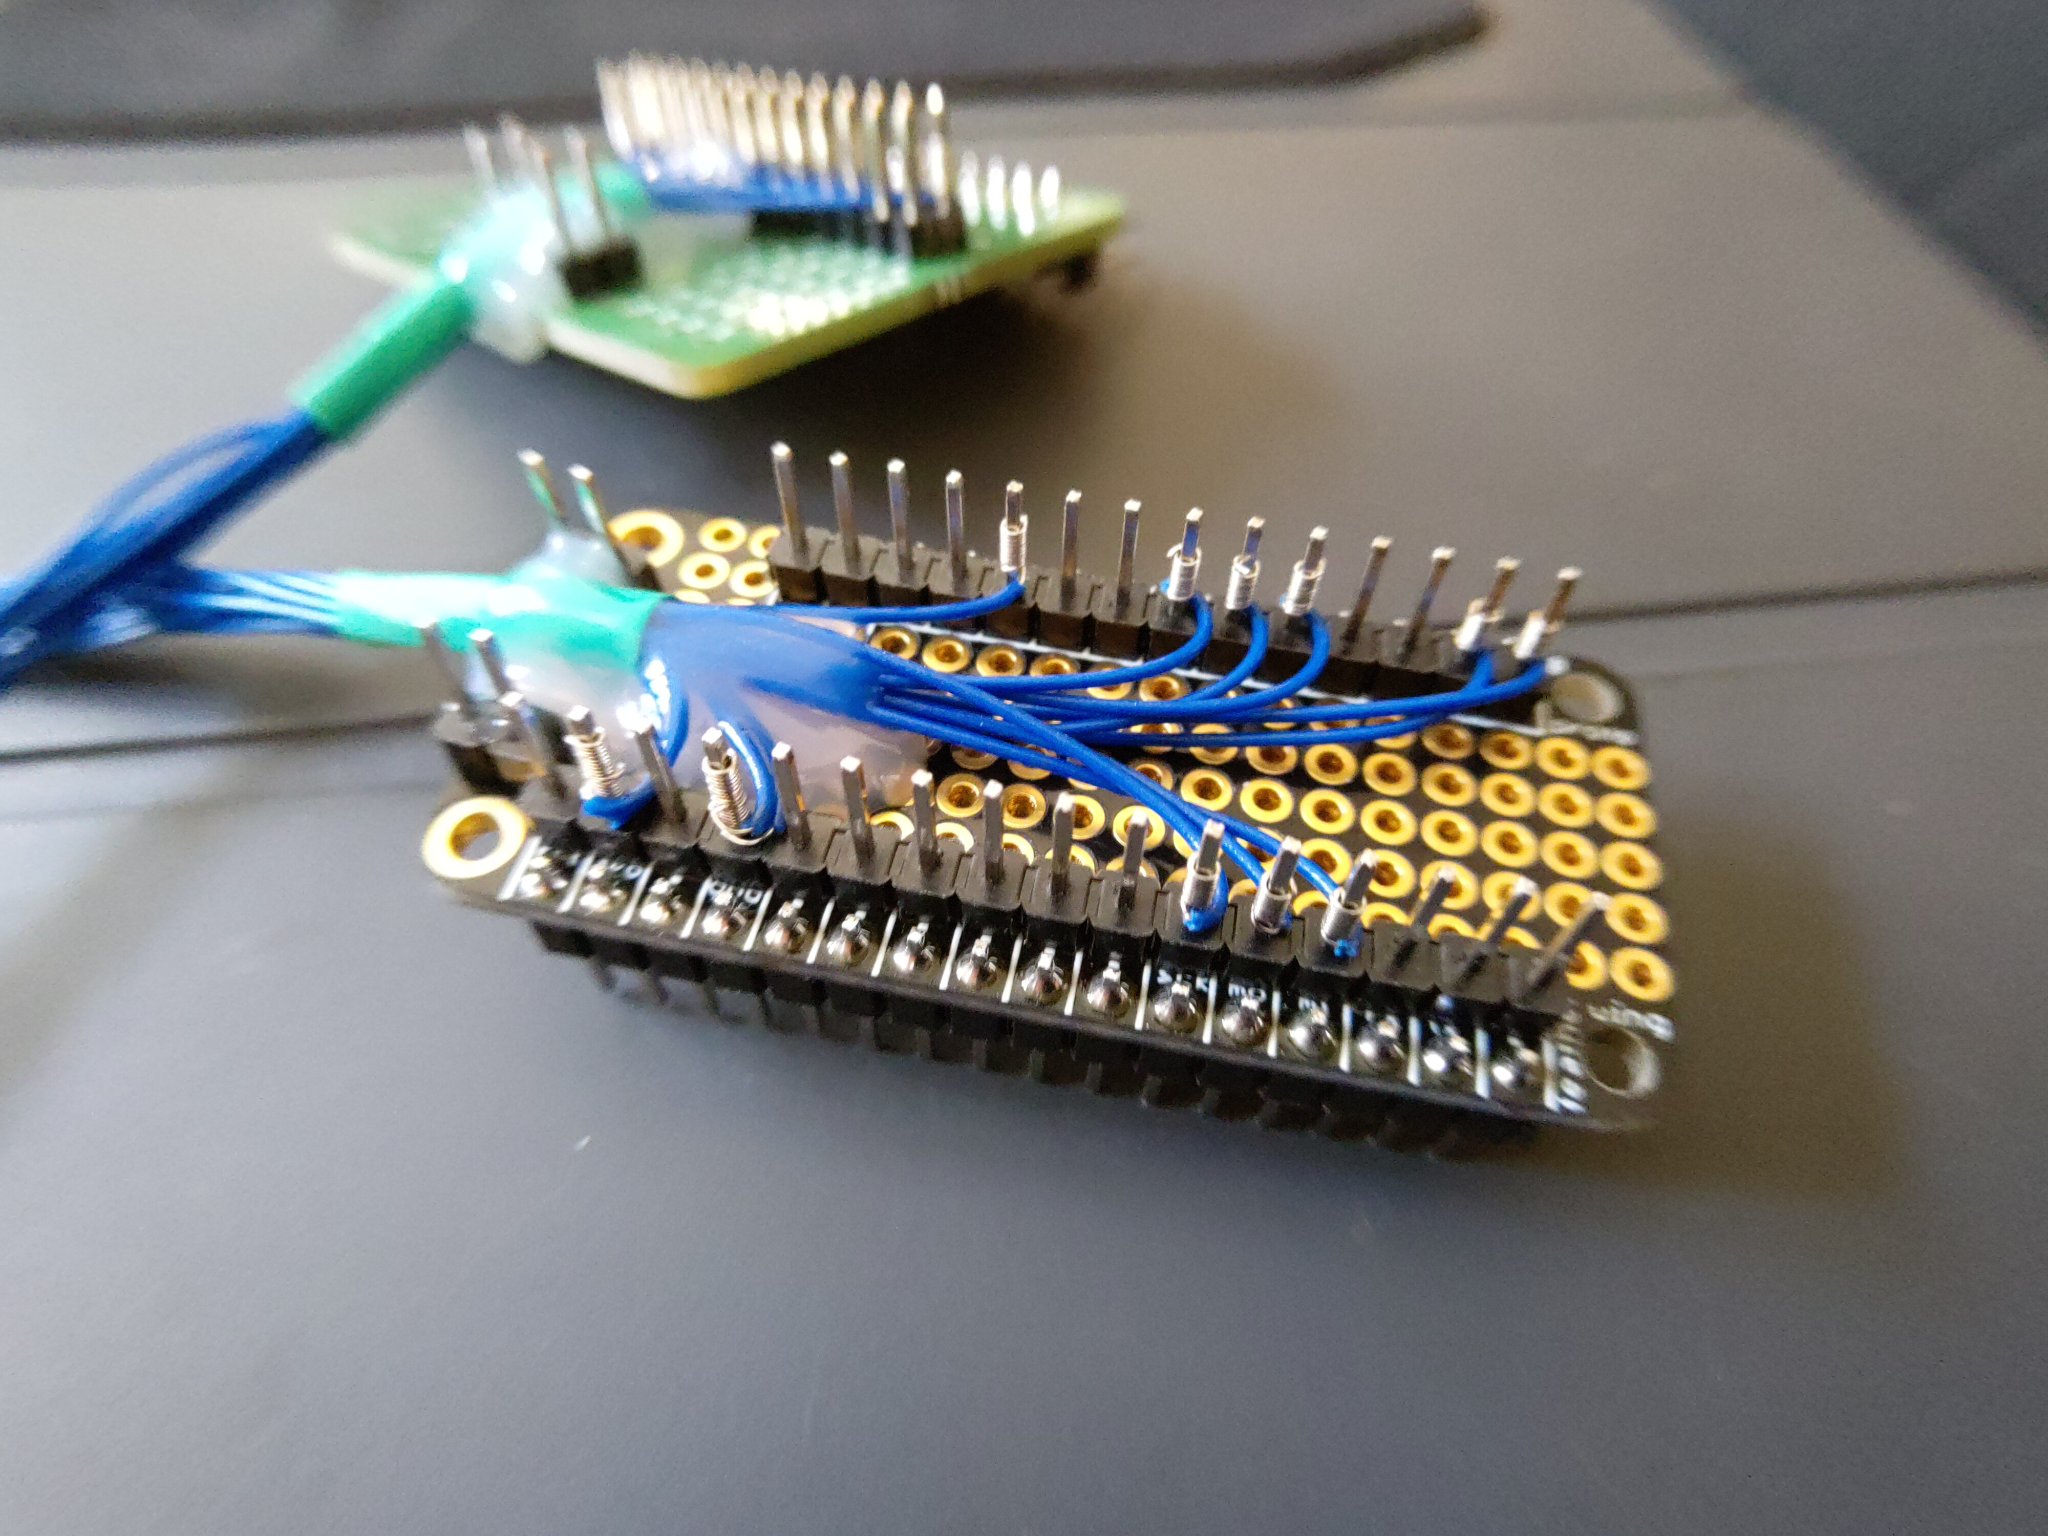 A close-up of a FeatherWing Proto card, with a wire wrapped connector, and hot glue strain relief